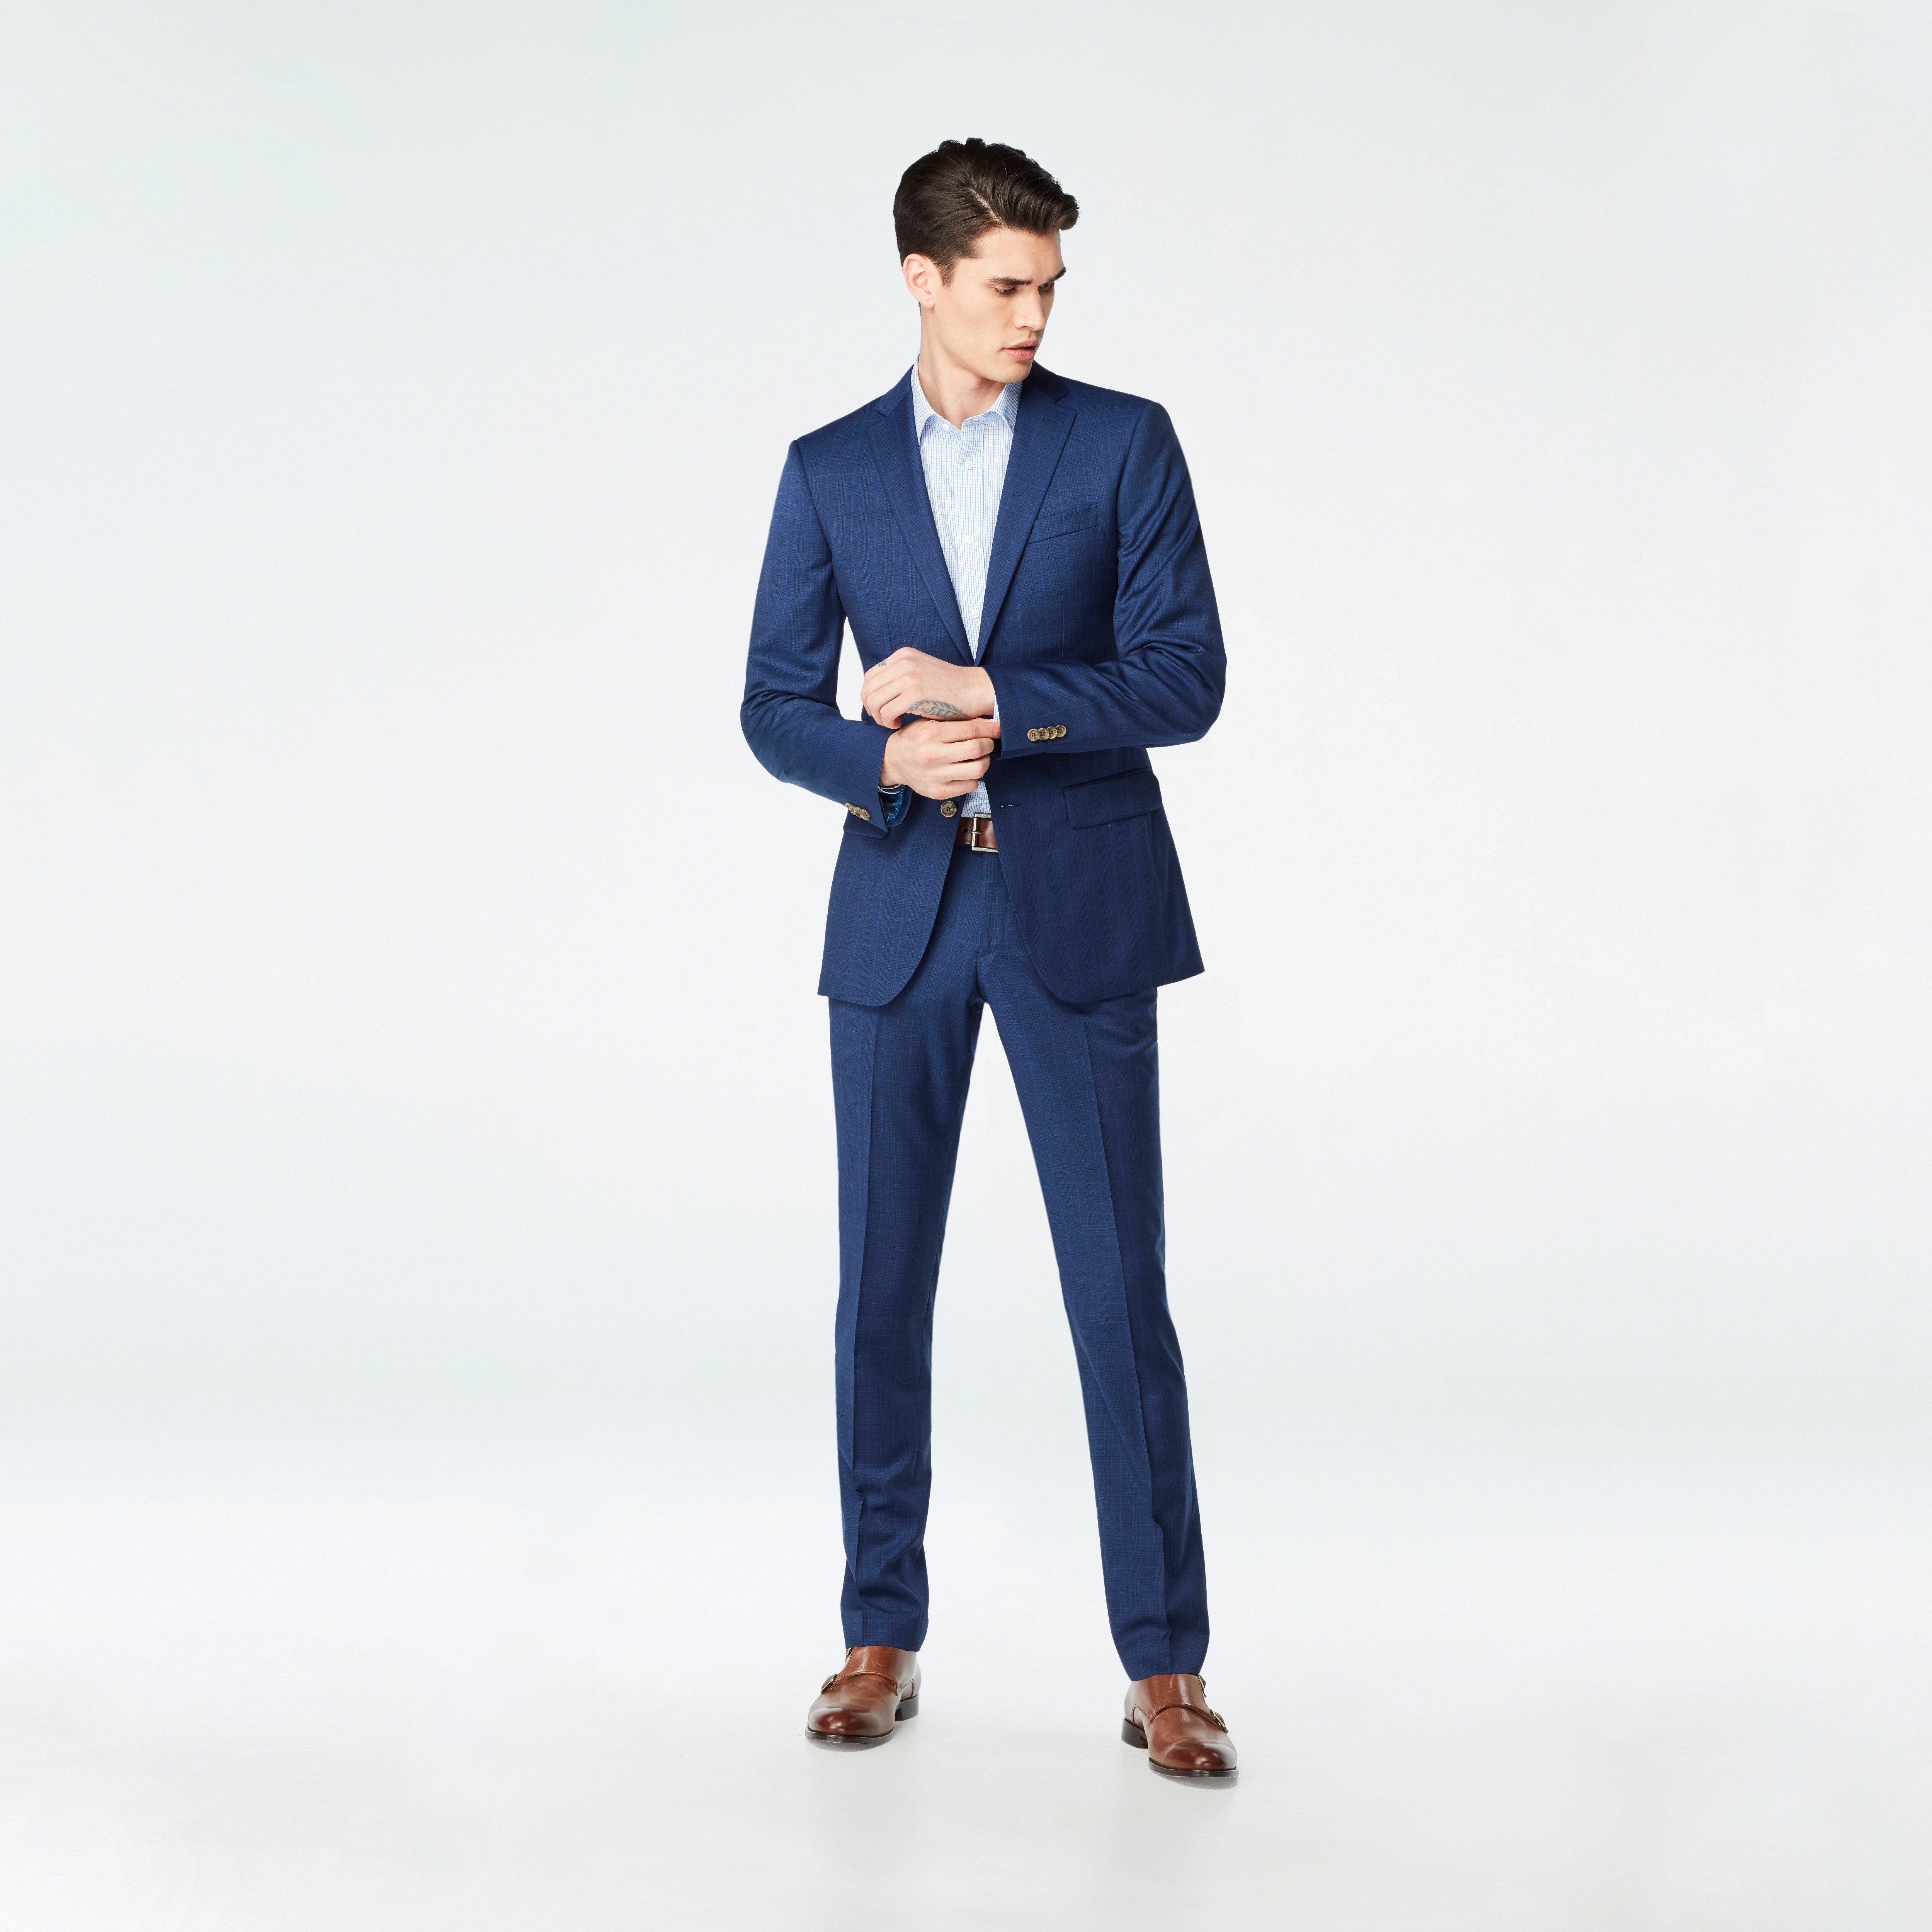 Navy Blue Suit for Men | Suits for Weddings & Events